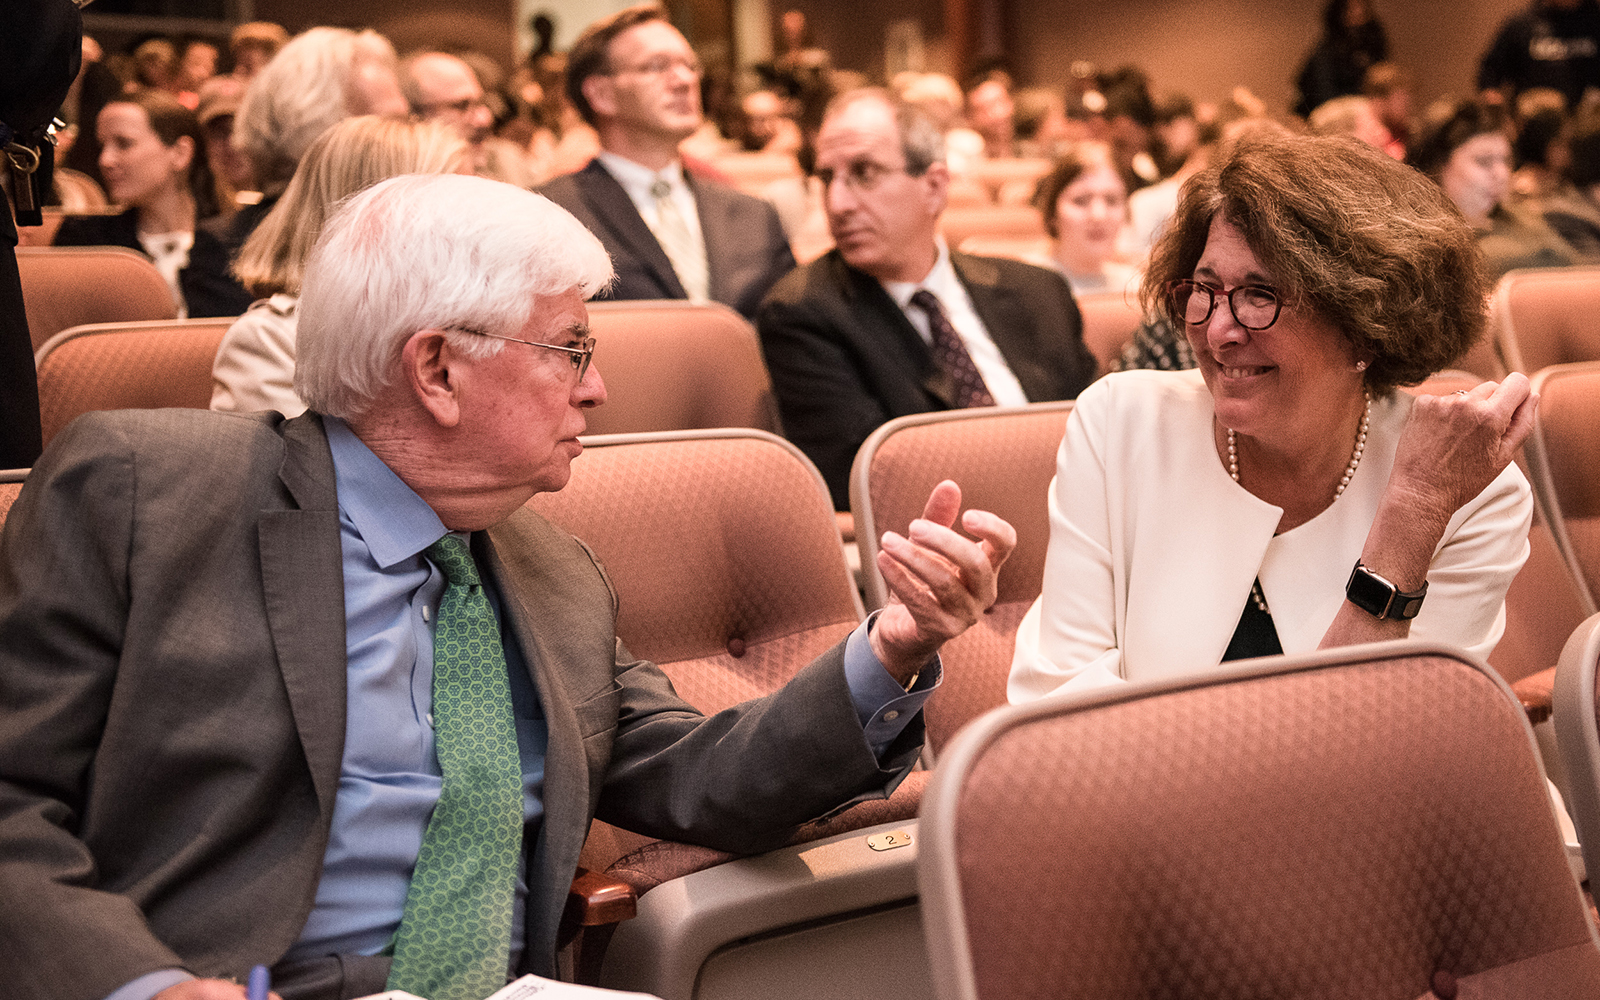 Amy Domini, the keynote speaker for the Business & Human Rights Initative Symposium, speaks with former U.S. Senator Christopher Dodd.